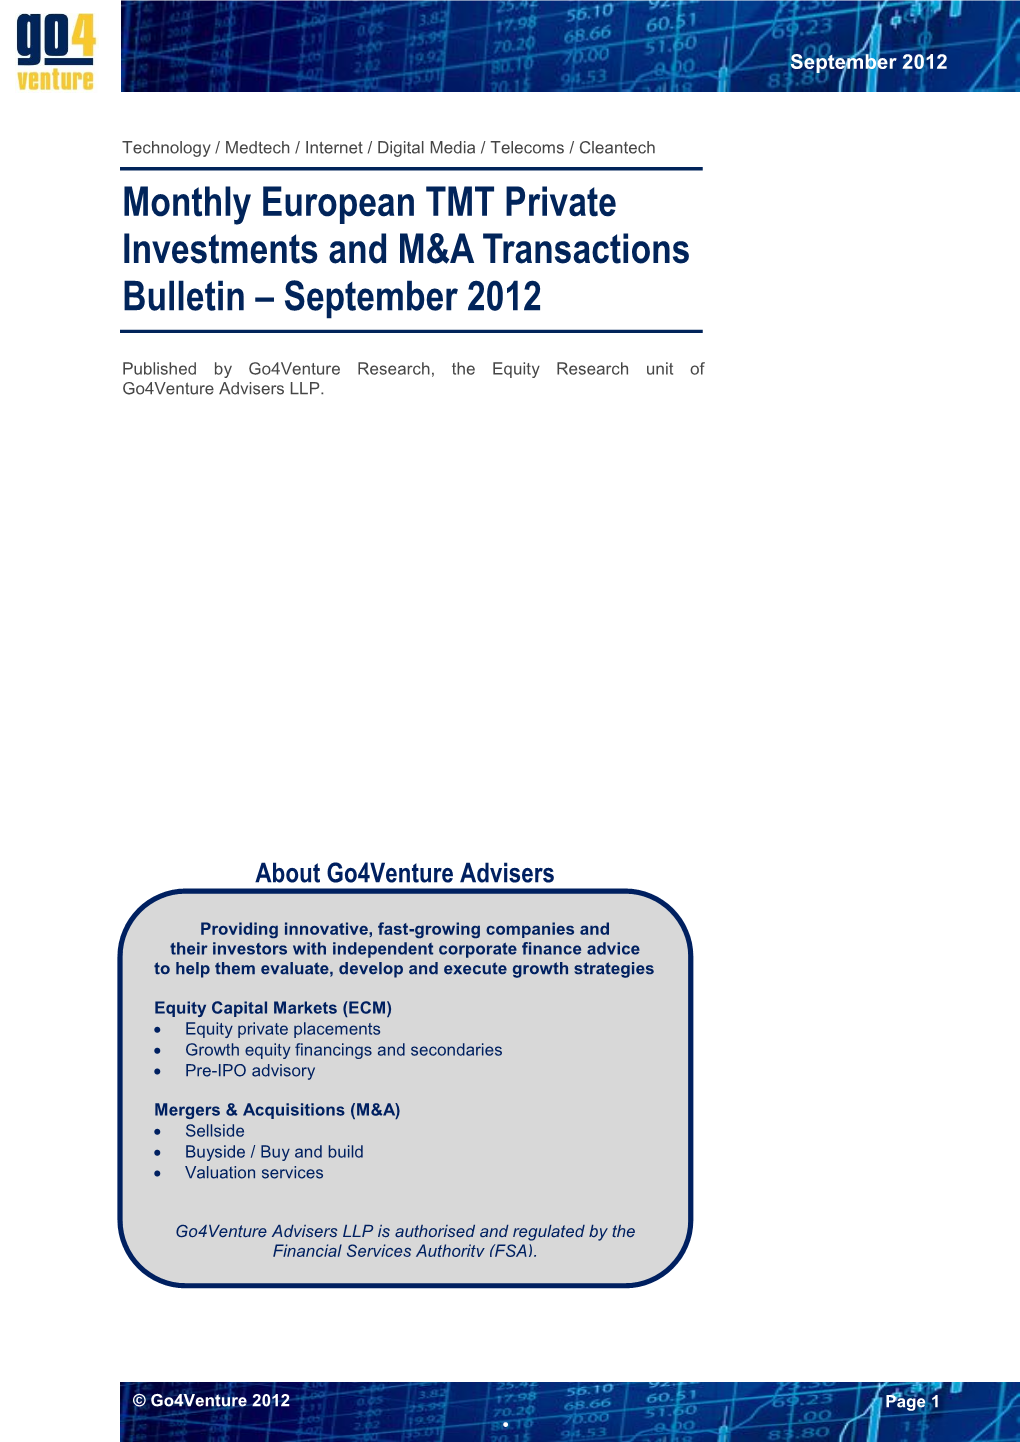 Monthly European TMT Private Investments and M&A Transactions Bulletin – September 2012